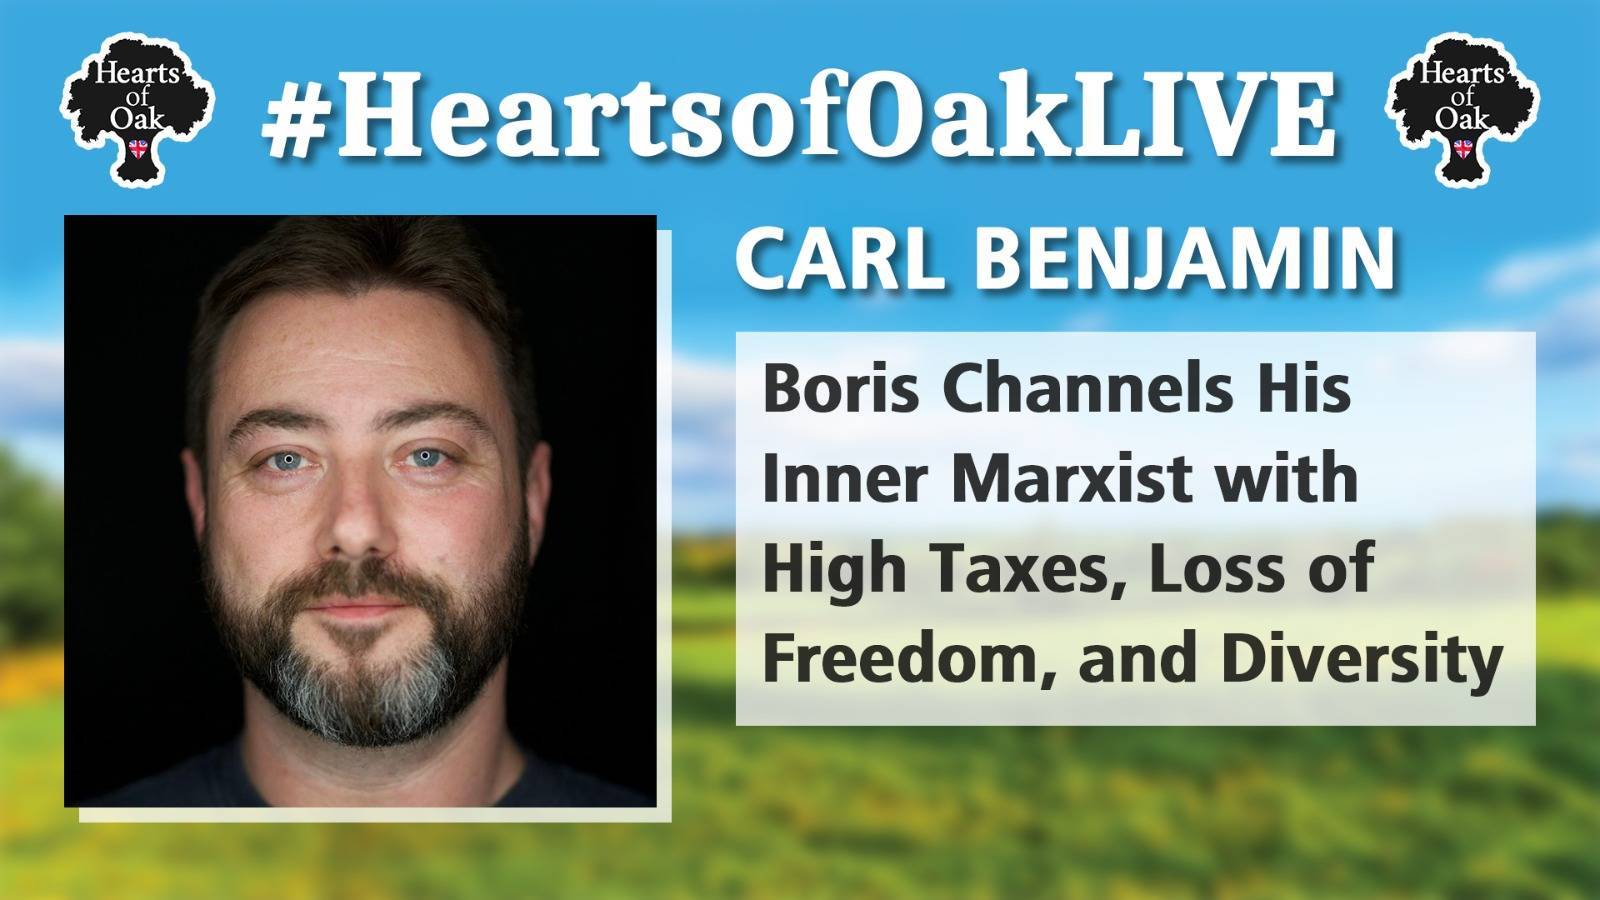 Carl Benjamin: Boris Channels His Inner Marxist with High Taxes, Loss of Freedom and Diversity